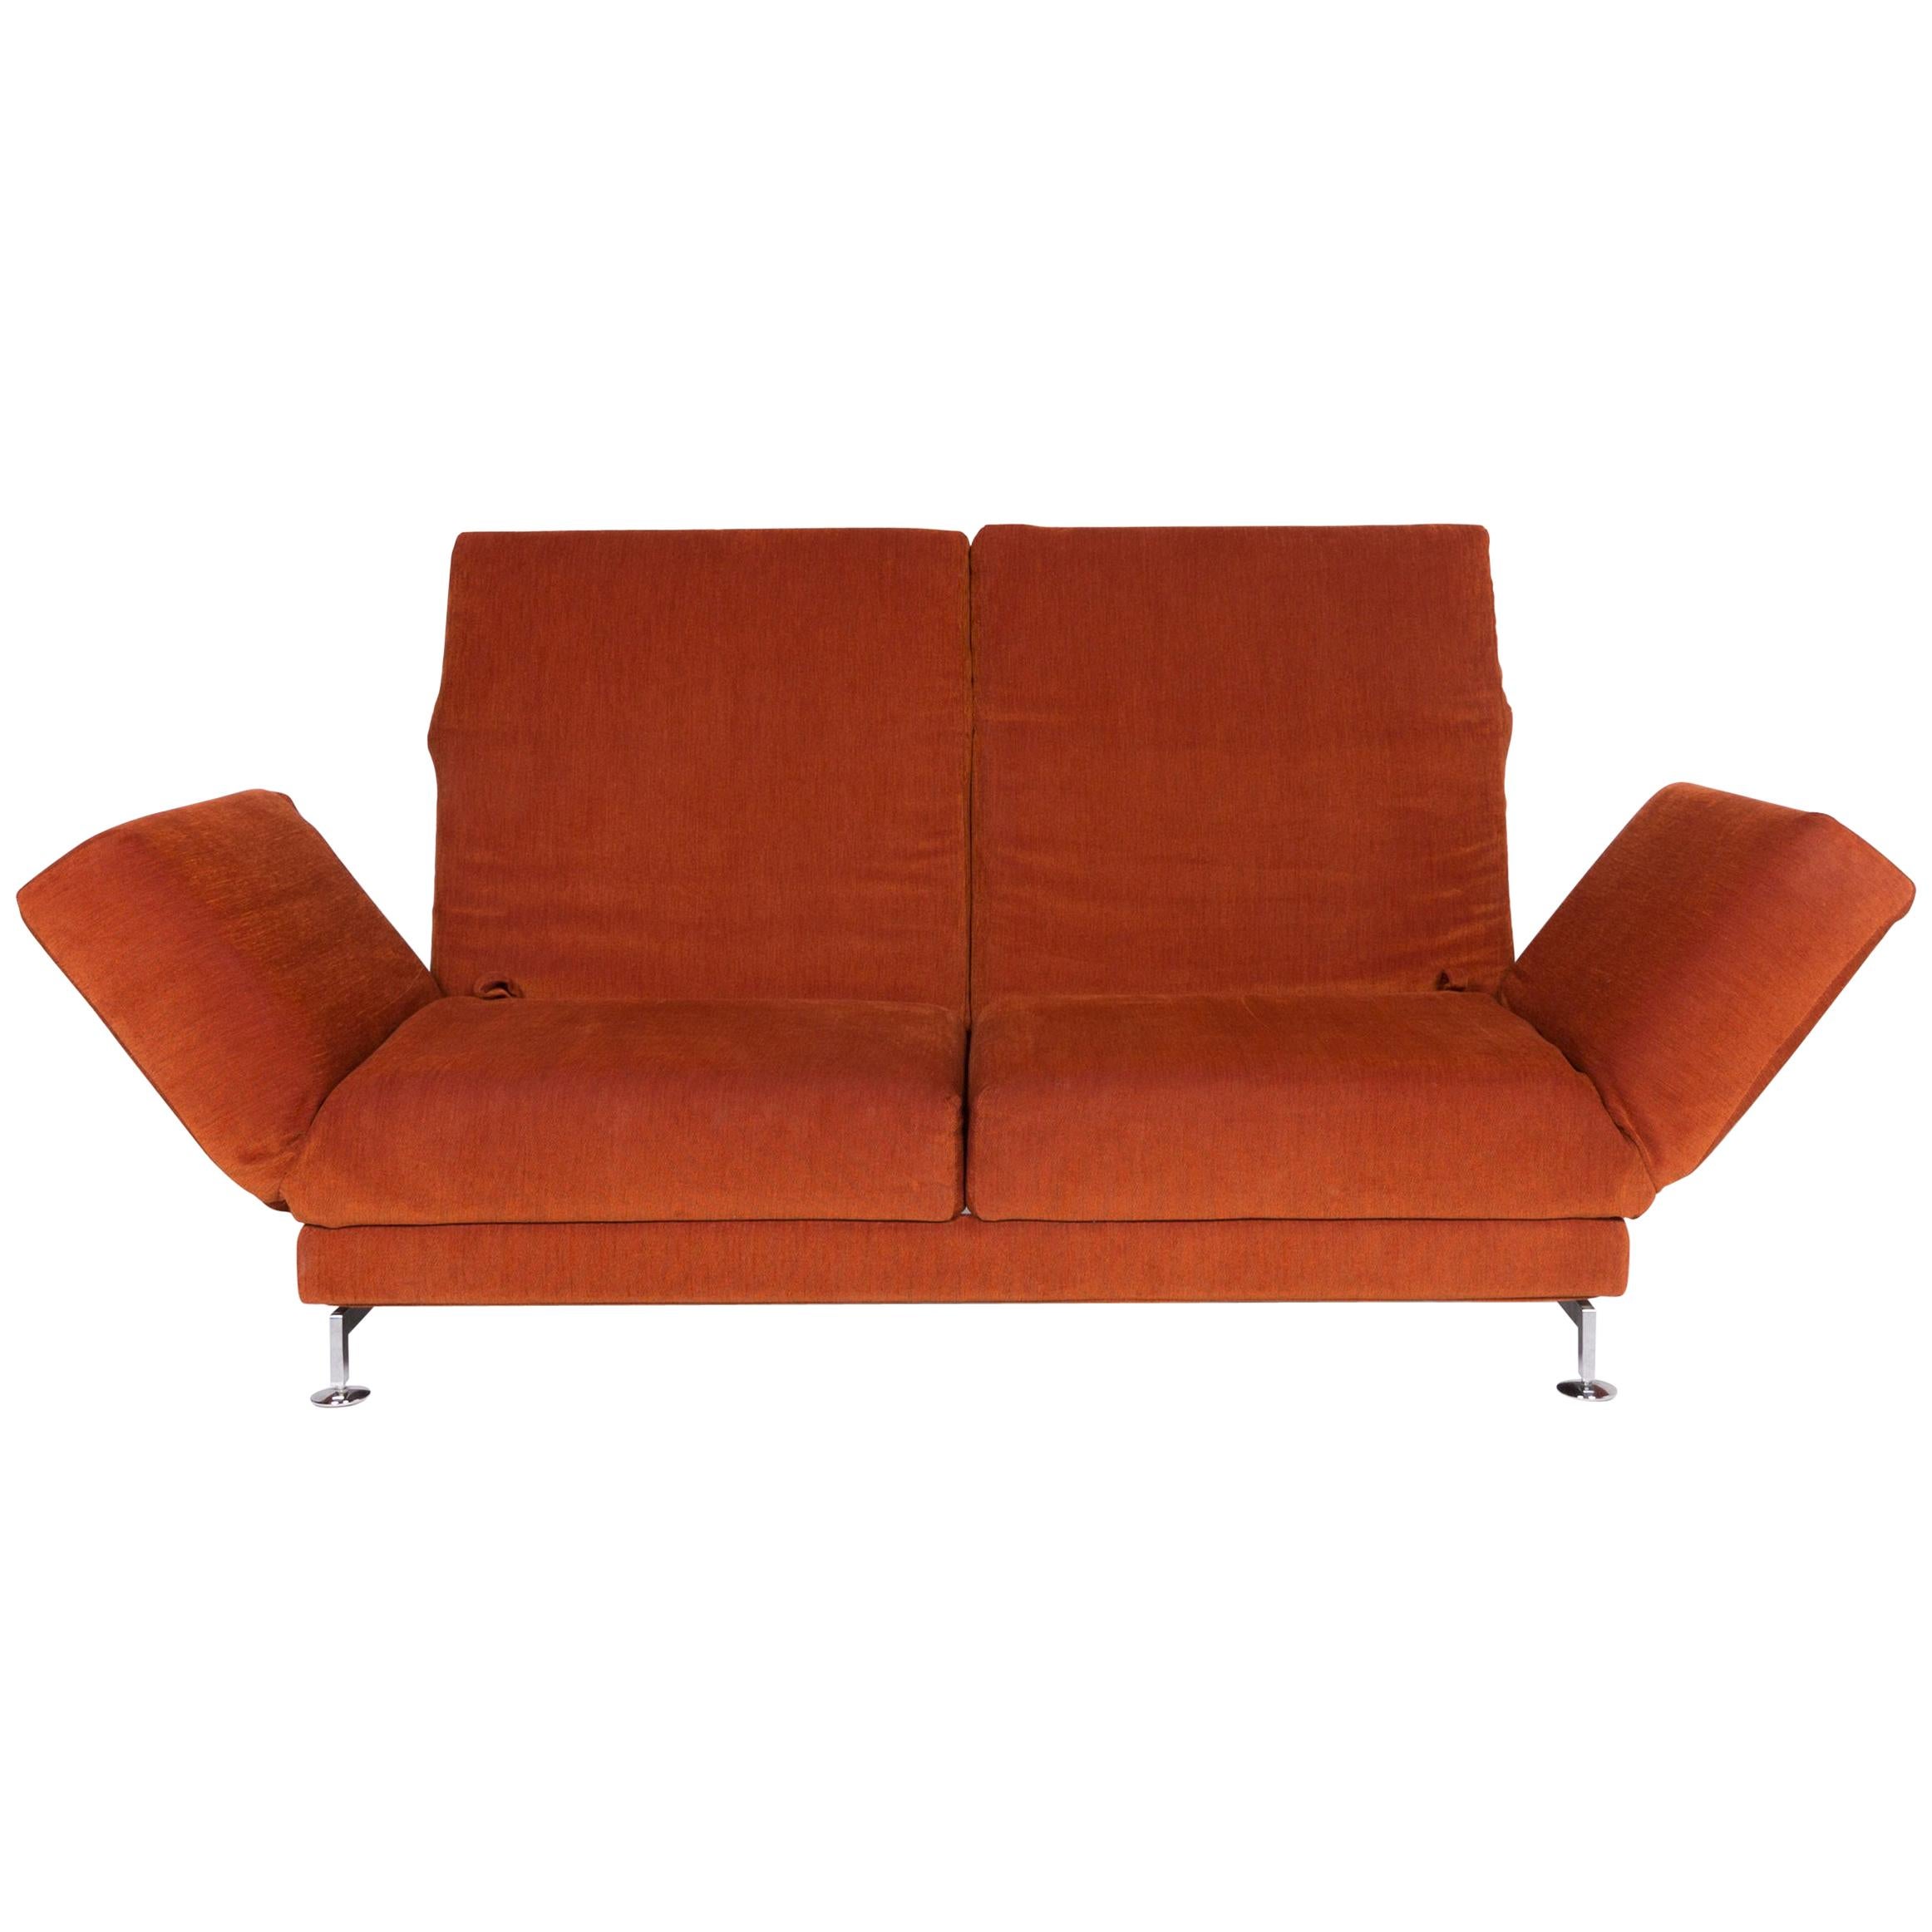 Brühl & Sippold Moule Fabric Sofa Orange Two-Seat Incl. Function